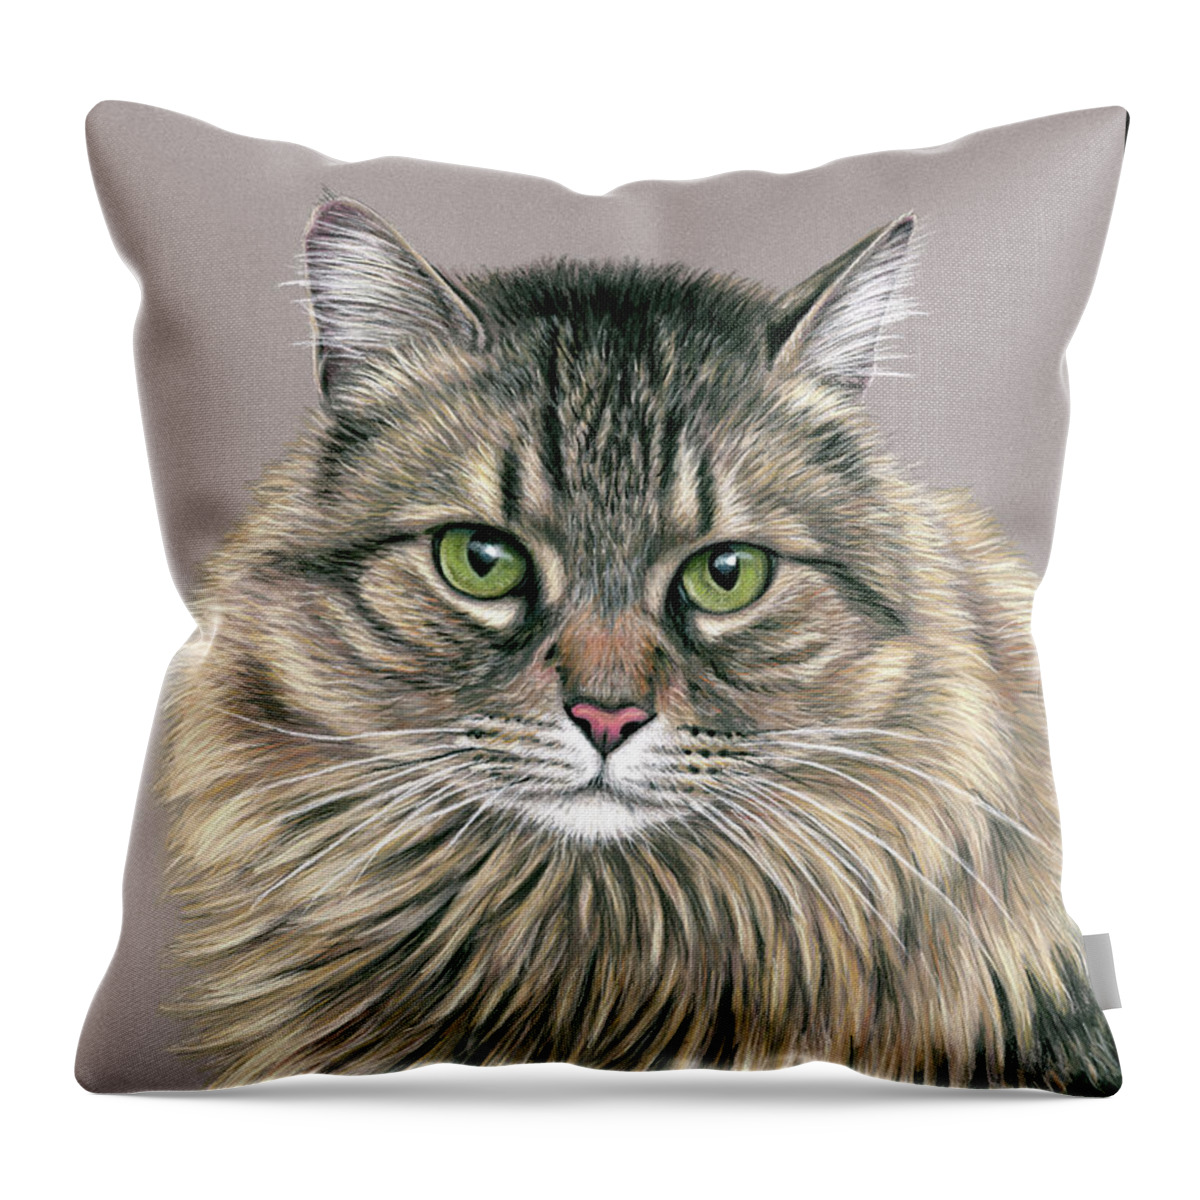 Cat Throw Pillow featuring the drawing Little Paul - Brown Tabby Cat by Rebecca Wang